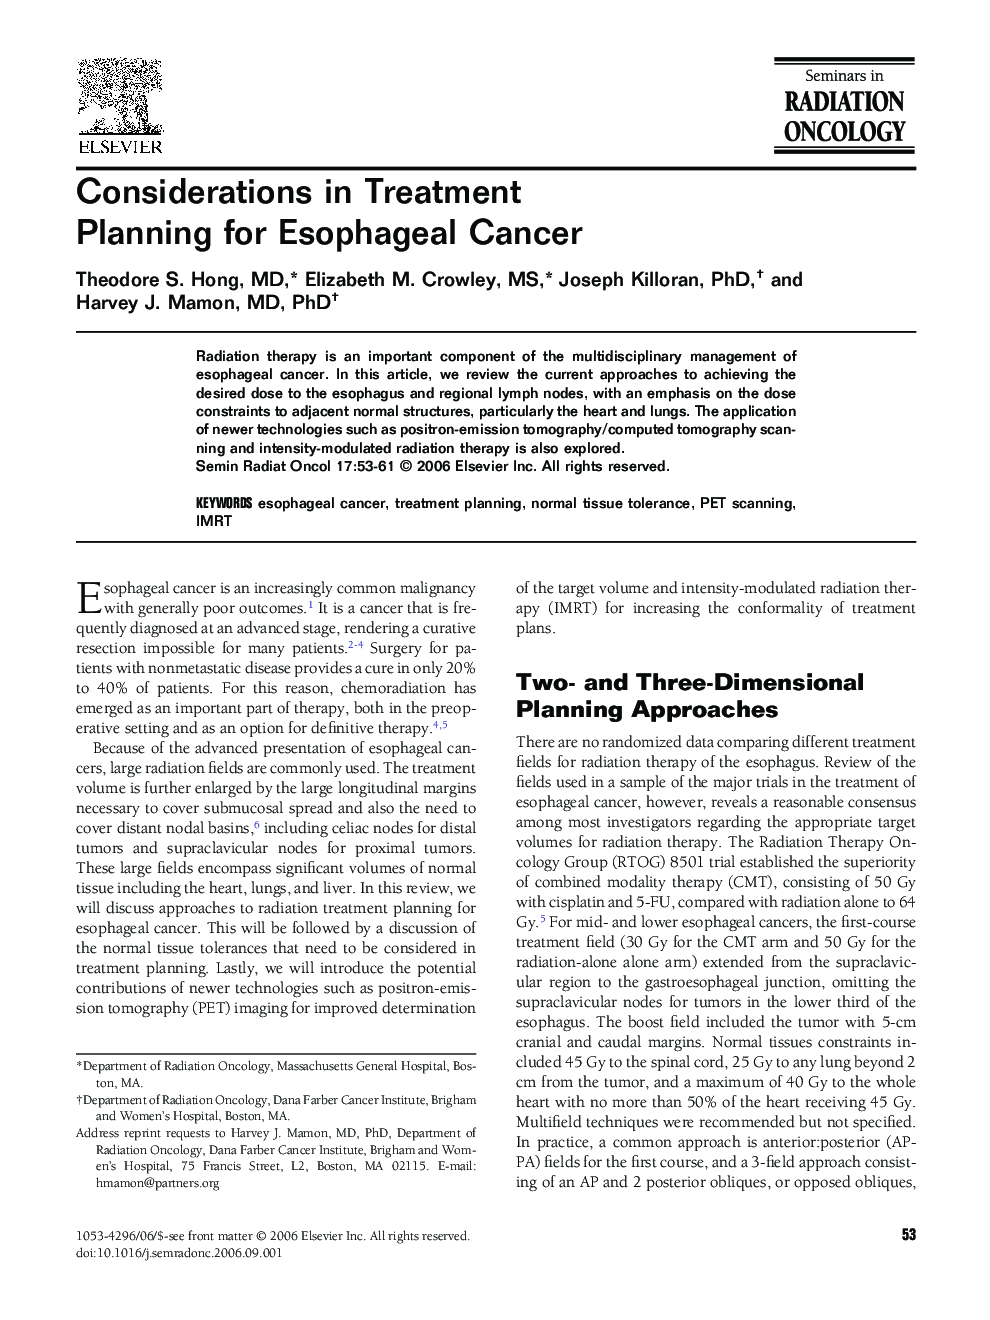 Considerations in Treatment Planning for Esophageal Cancer